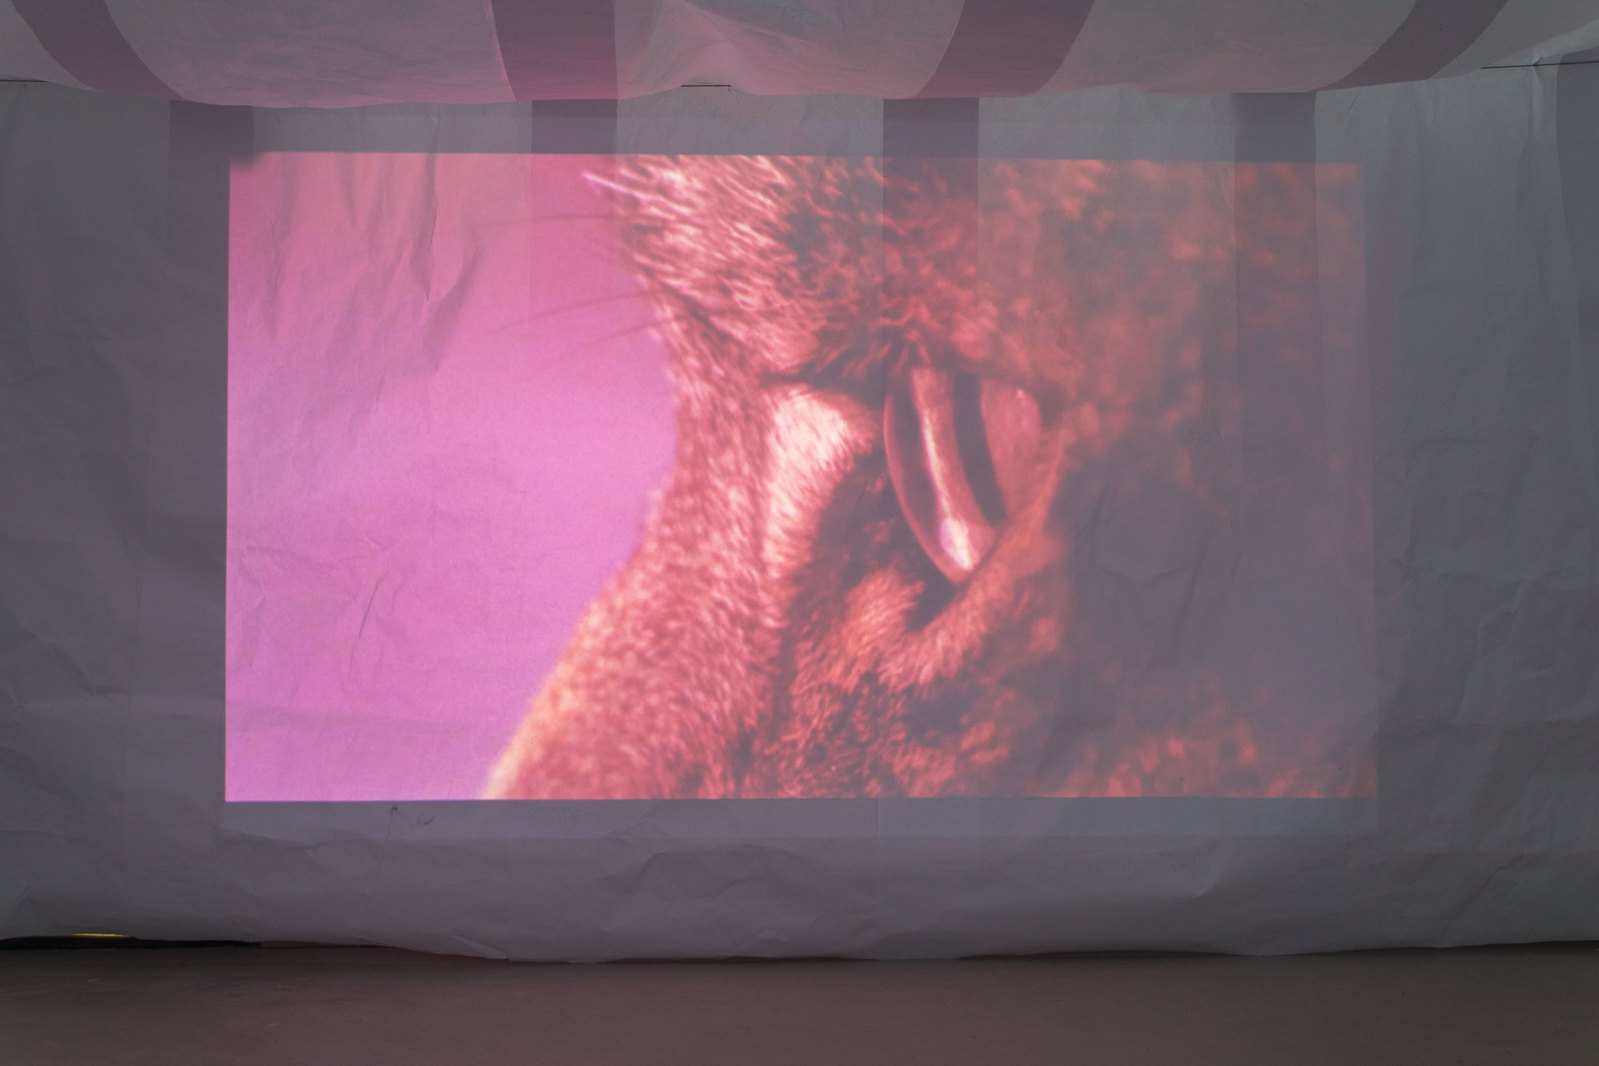 Projection onto paper showing a purple tinted close-up of a cats eye. Jamie Kane